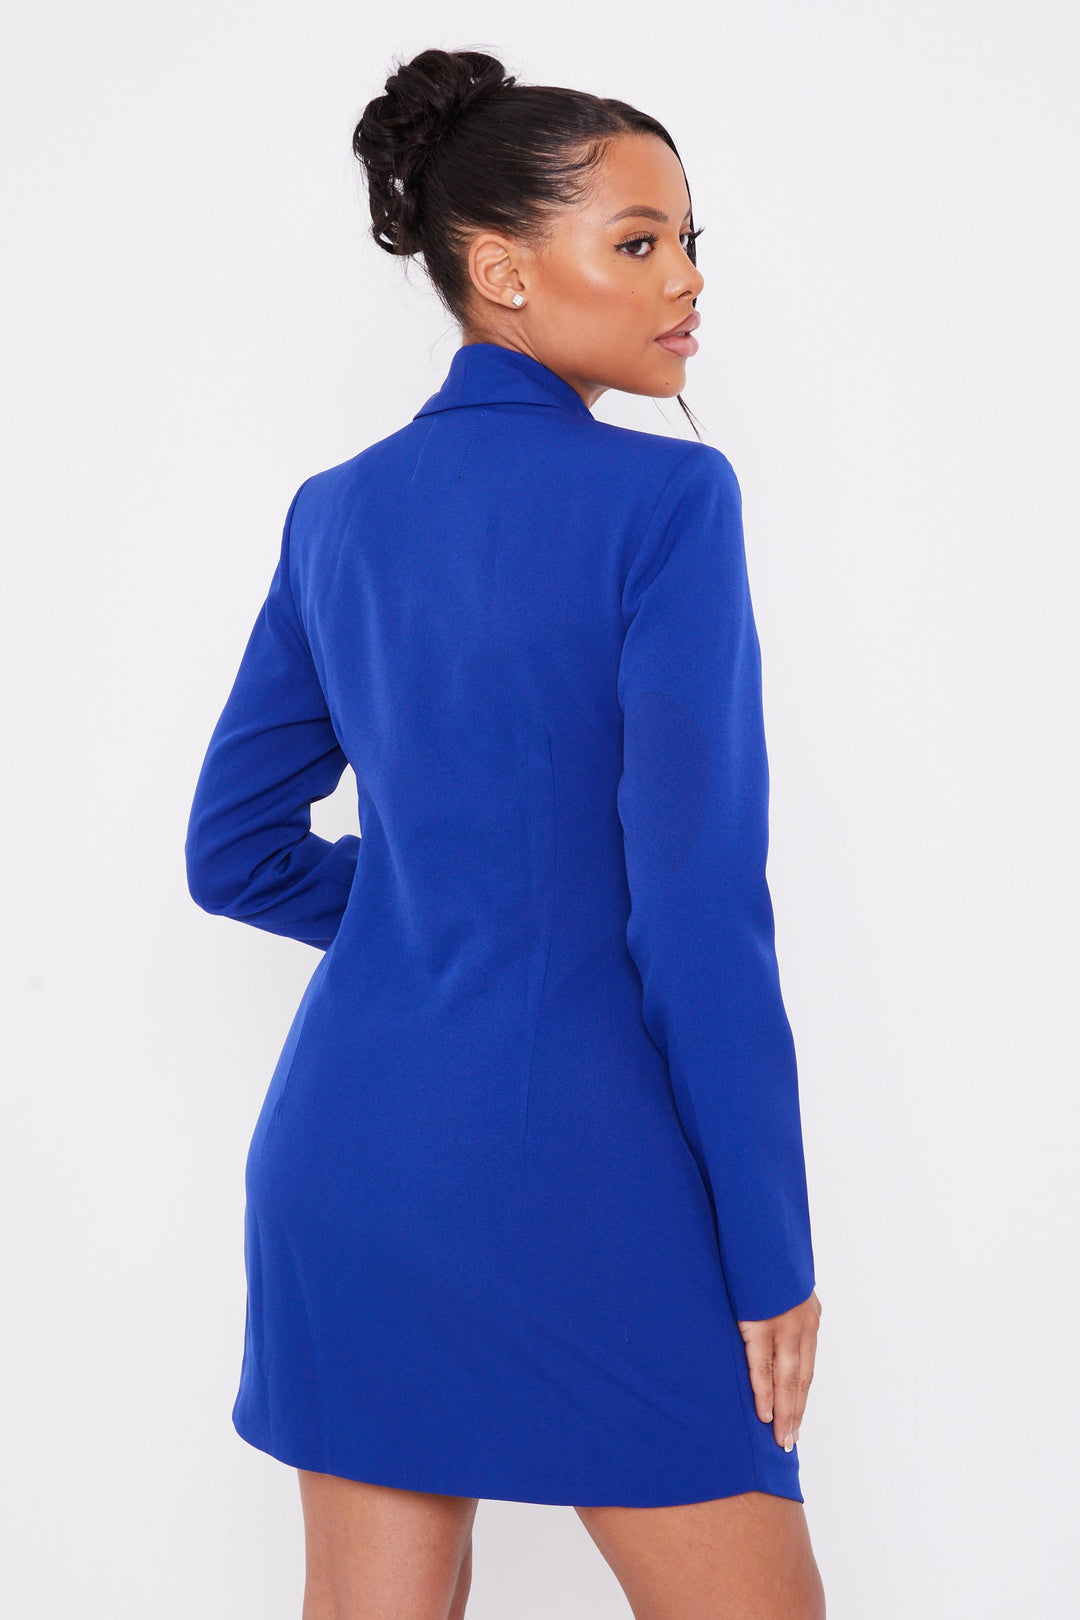 Navy Double Breasted Gold Button Blazer Dress